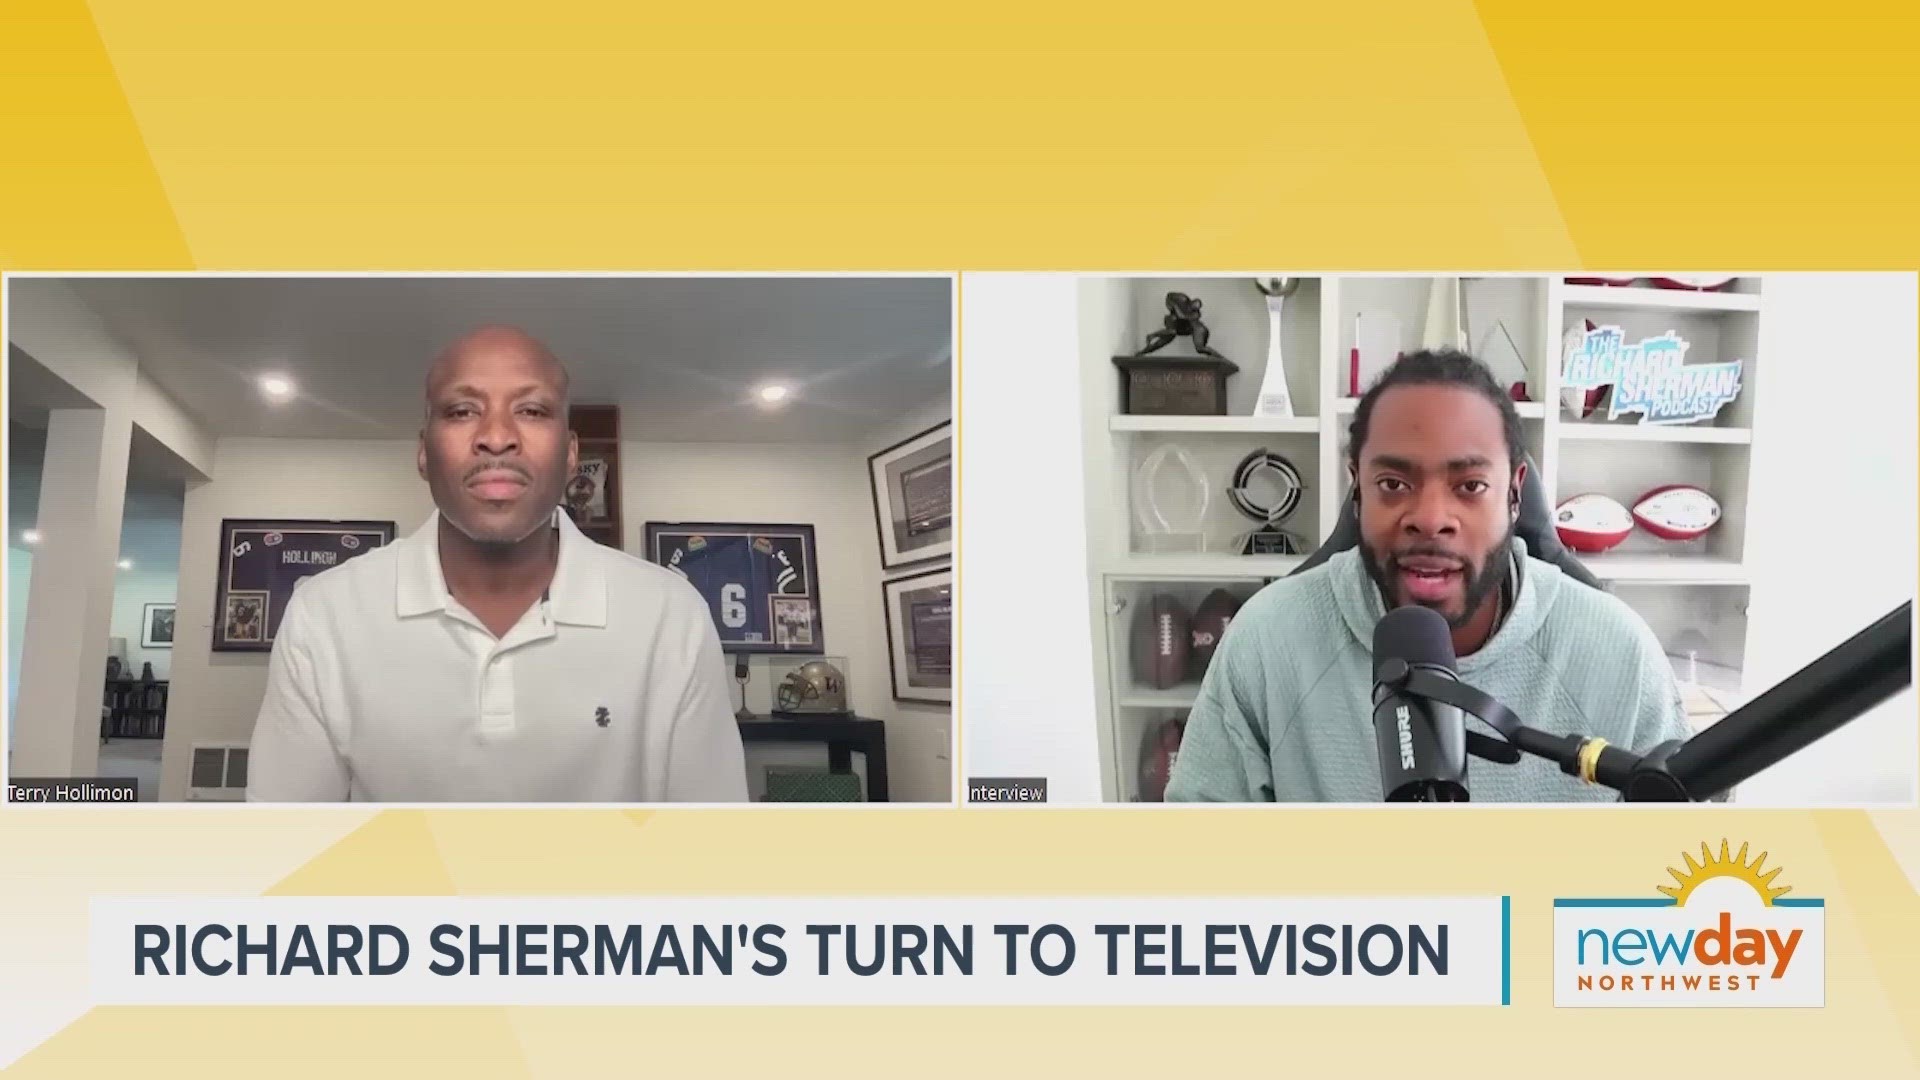 Terry Hollimon chats with Richard Sherman about his turn to television after hosting a successful podcast of his own.